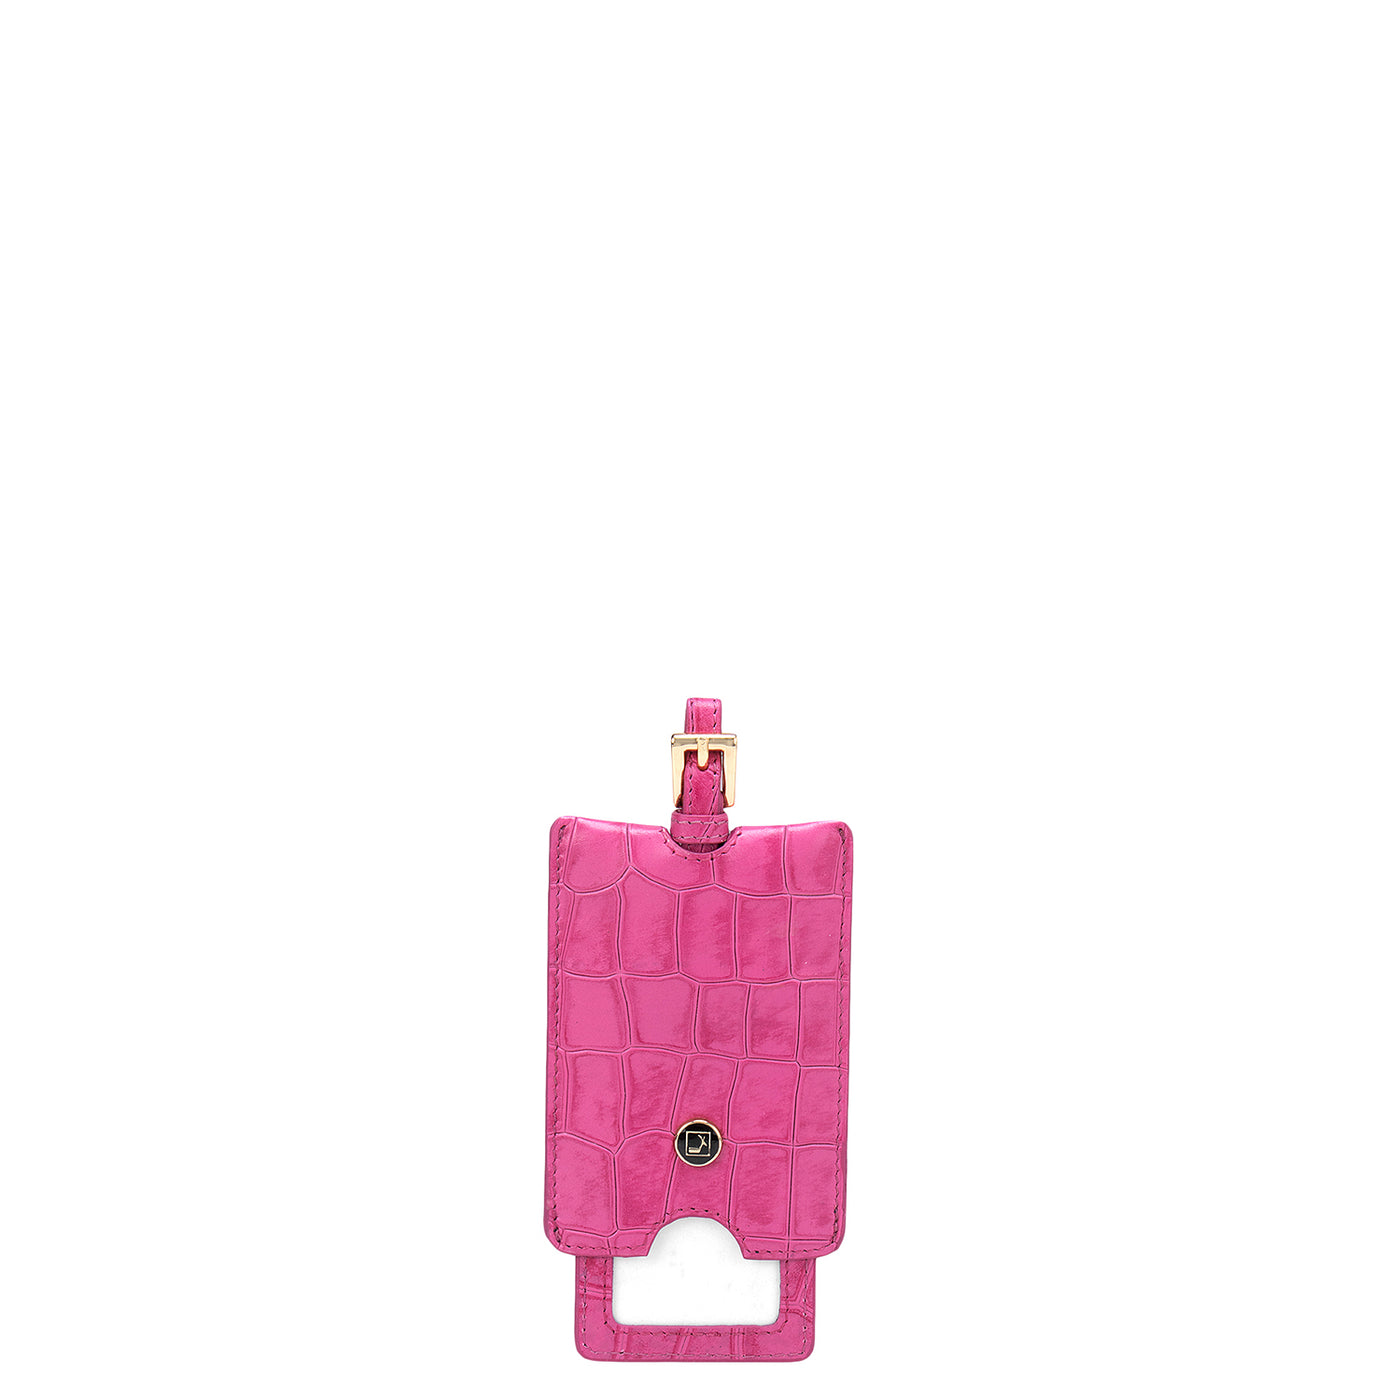 Croco Leather Luggage Tag - Hot Pink